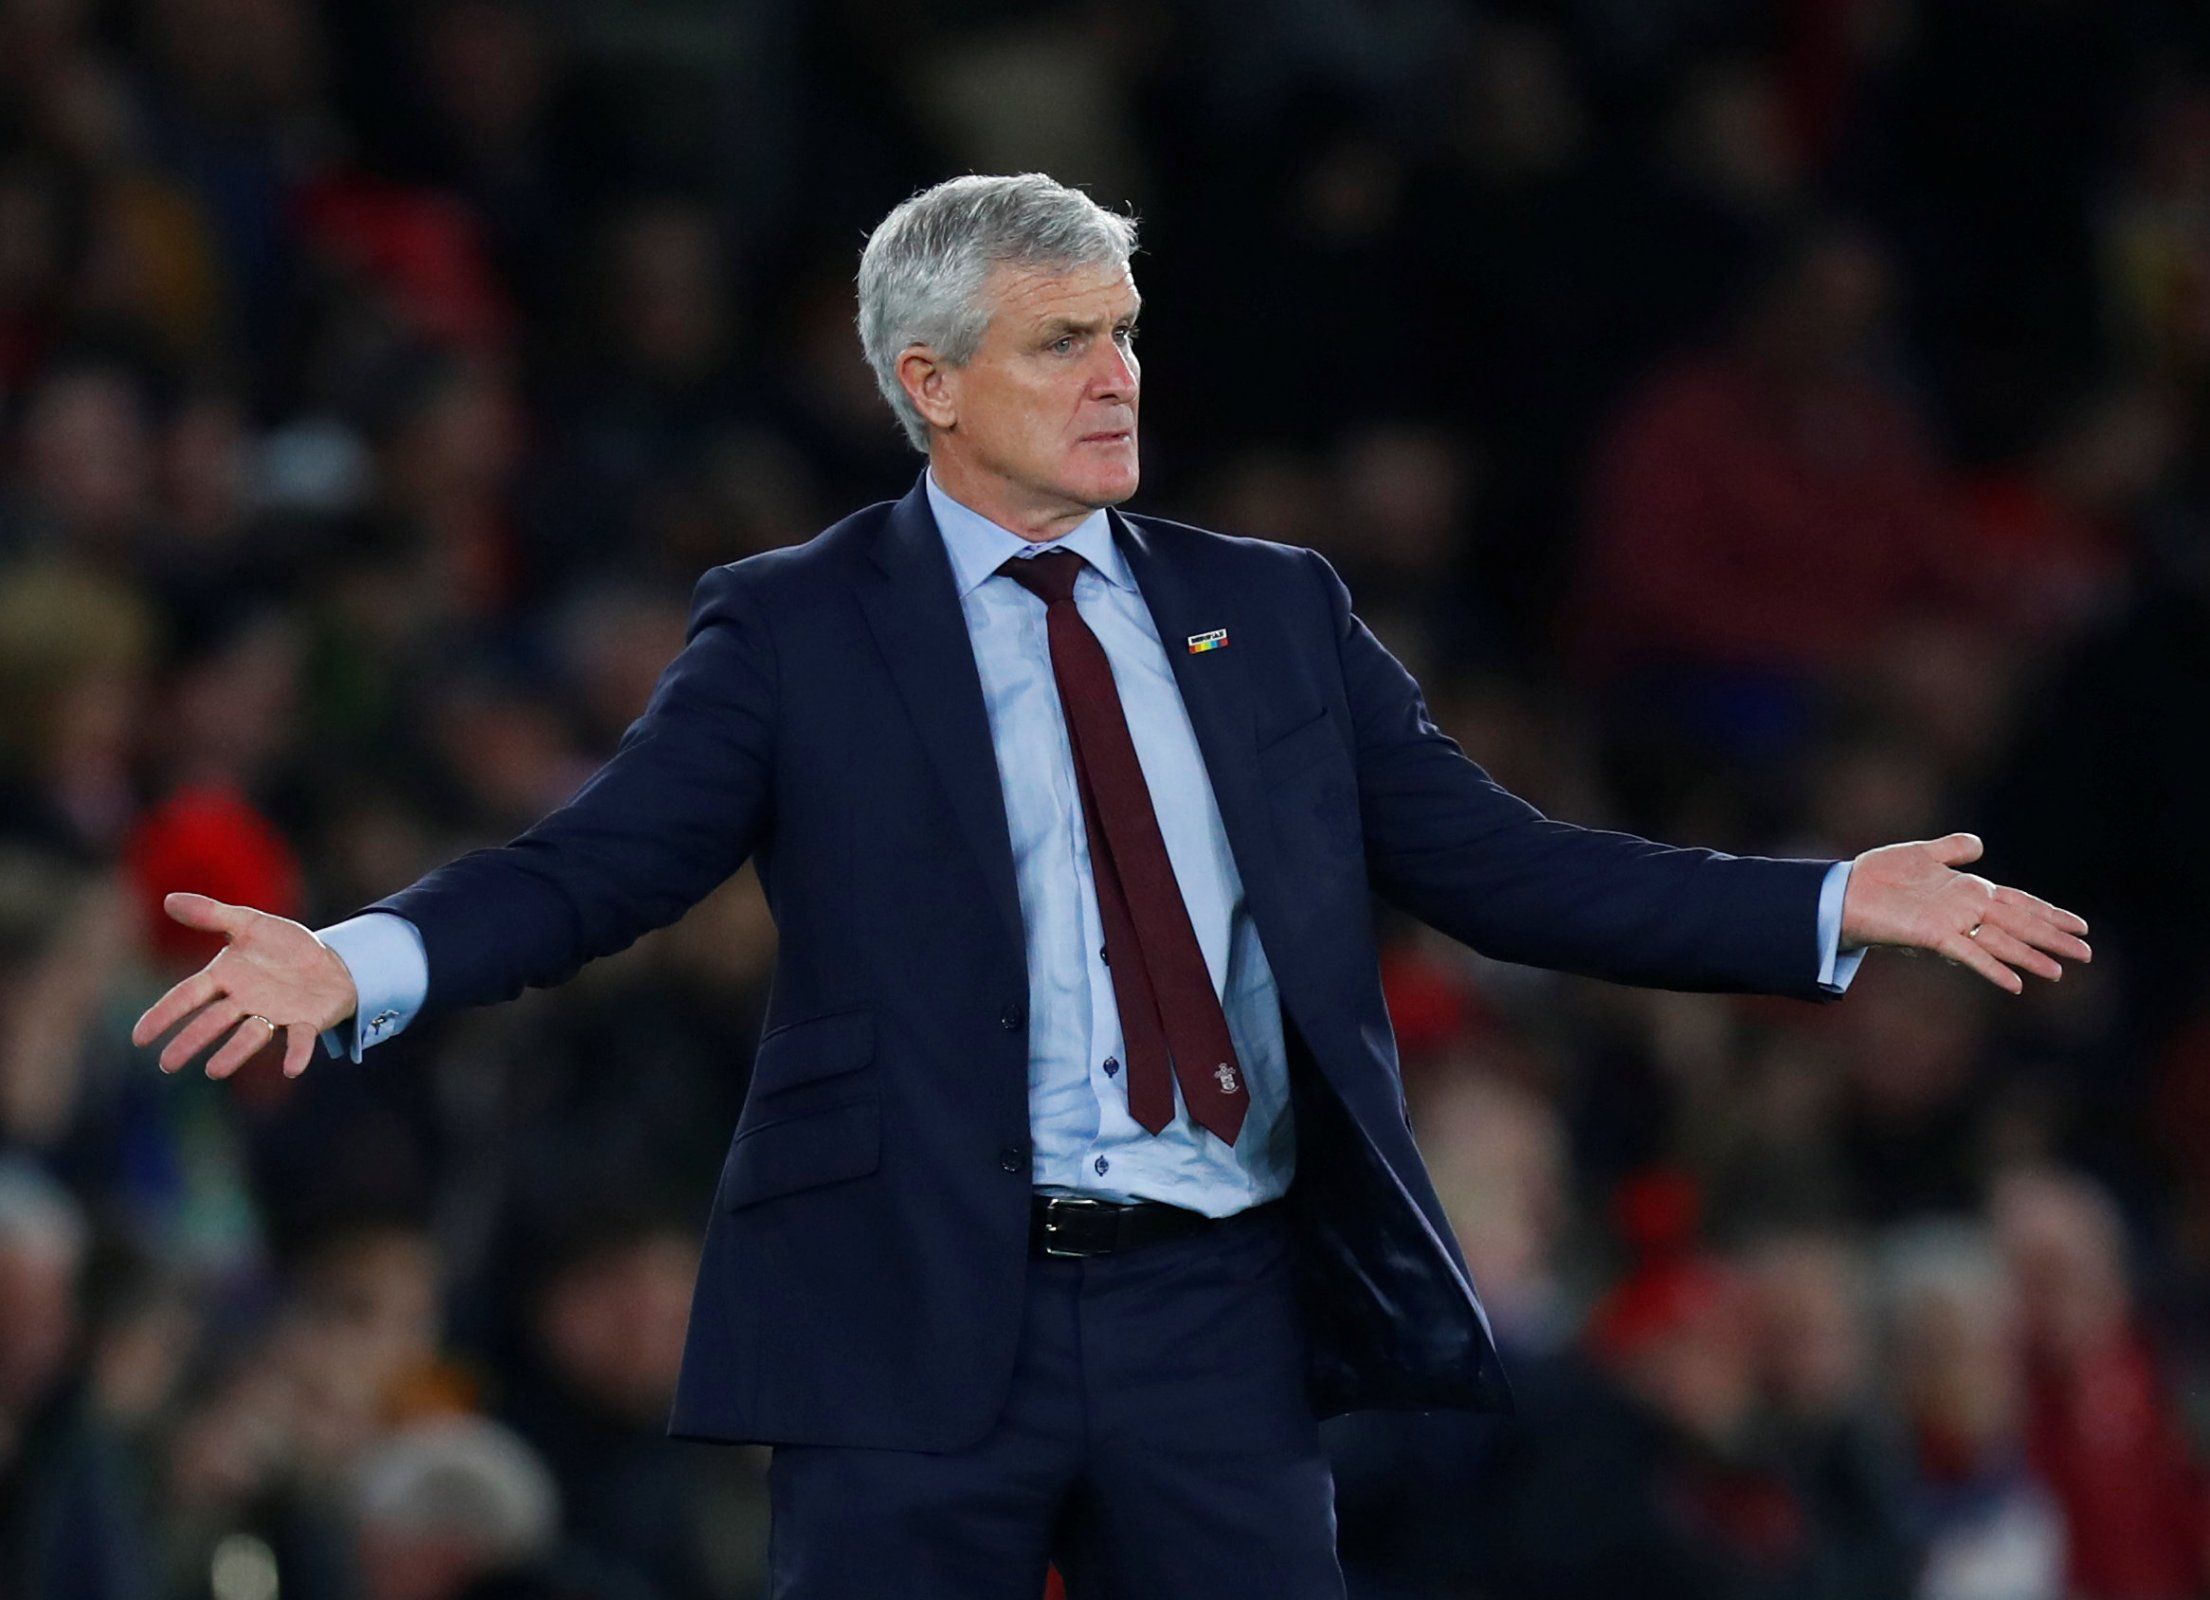 Southampton manager Mark Hughes reacts questioning during Manchester United draw prior to sacking